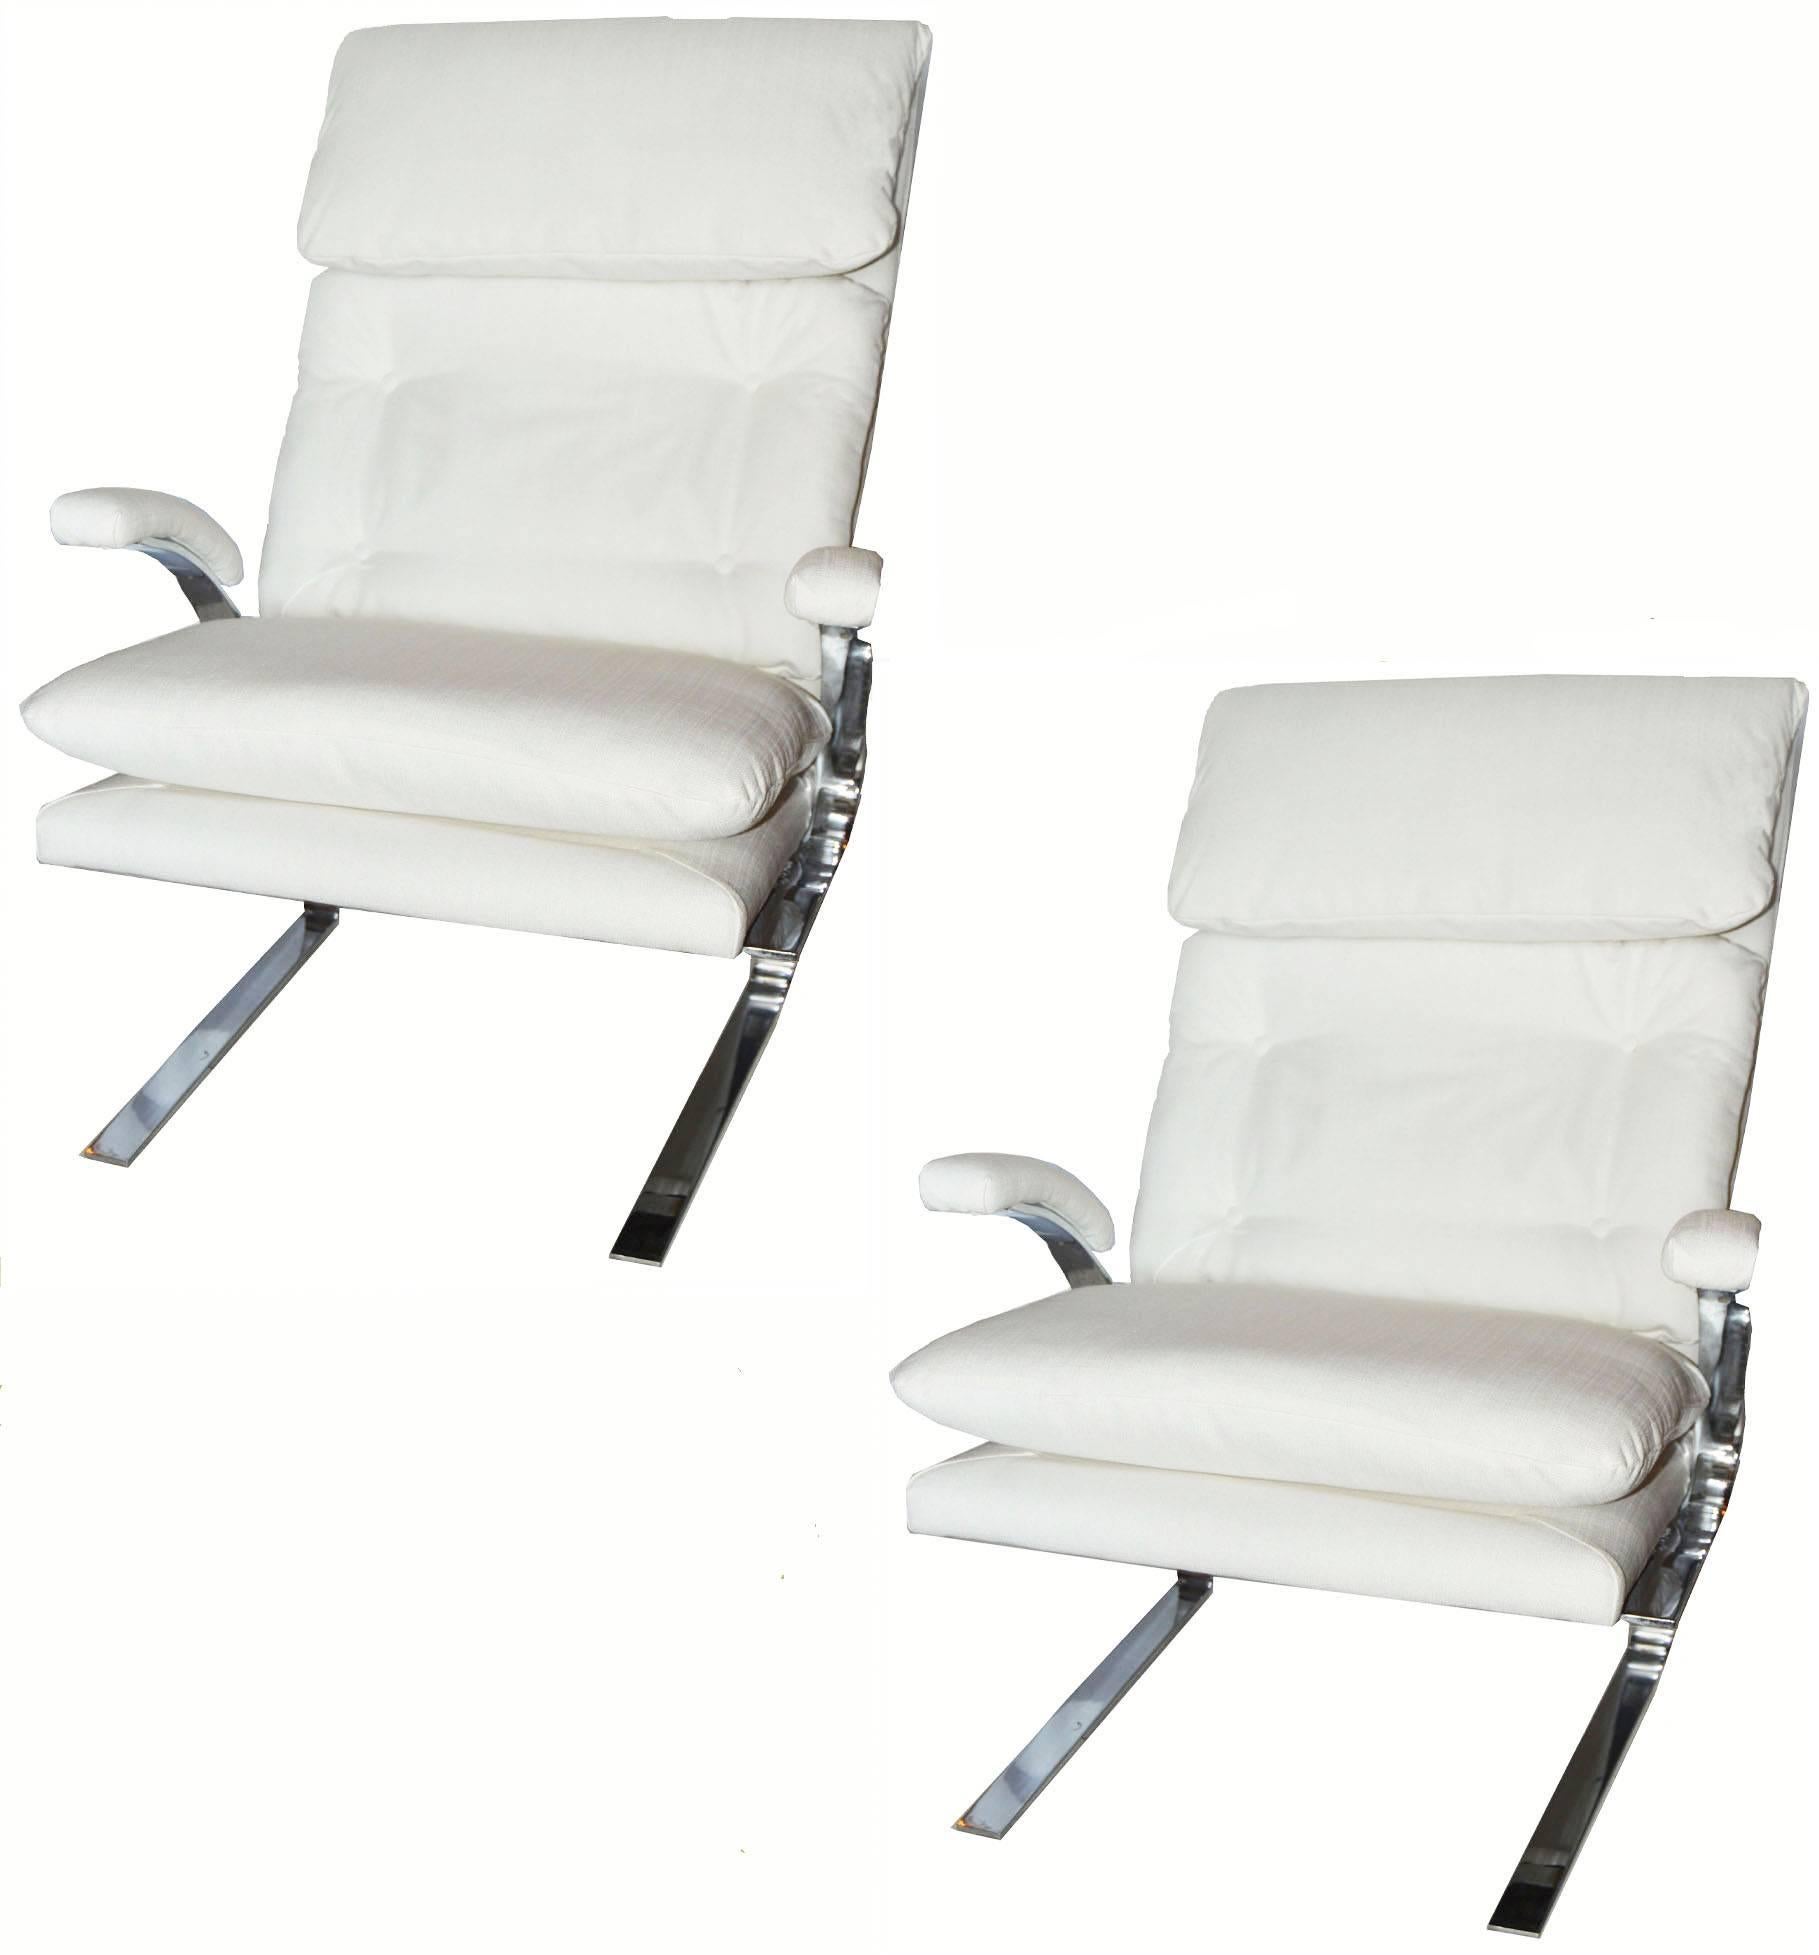 Late 20th Century Pair of Milo Baughman Style Lounge Chair For Sale